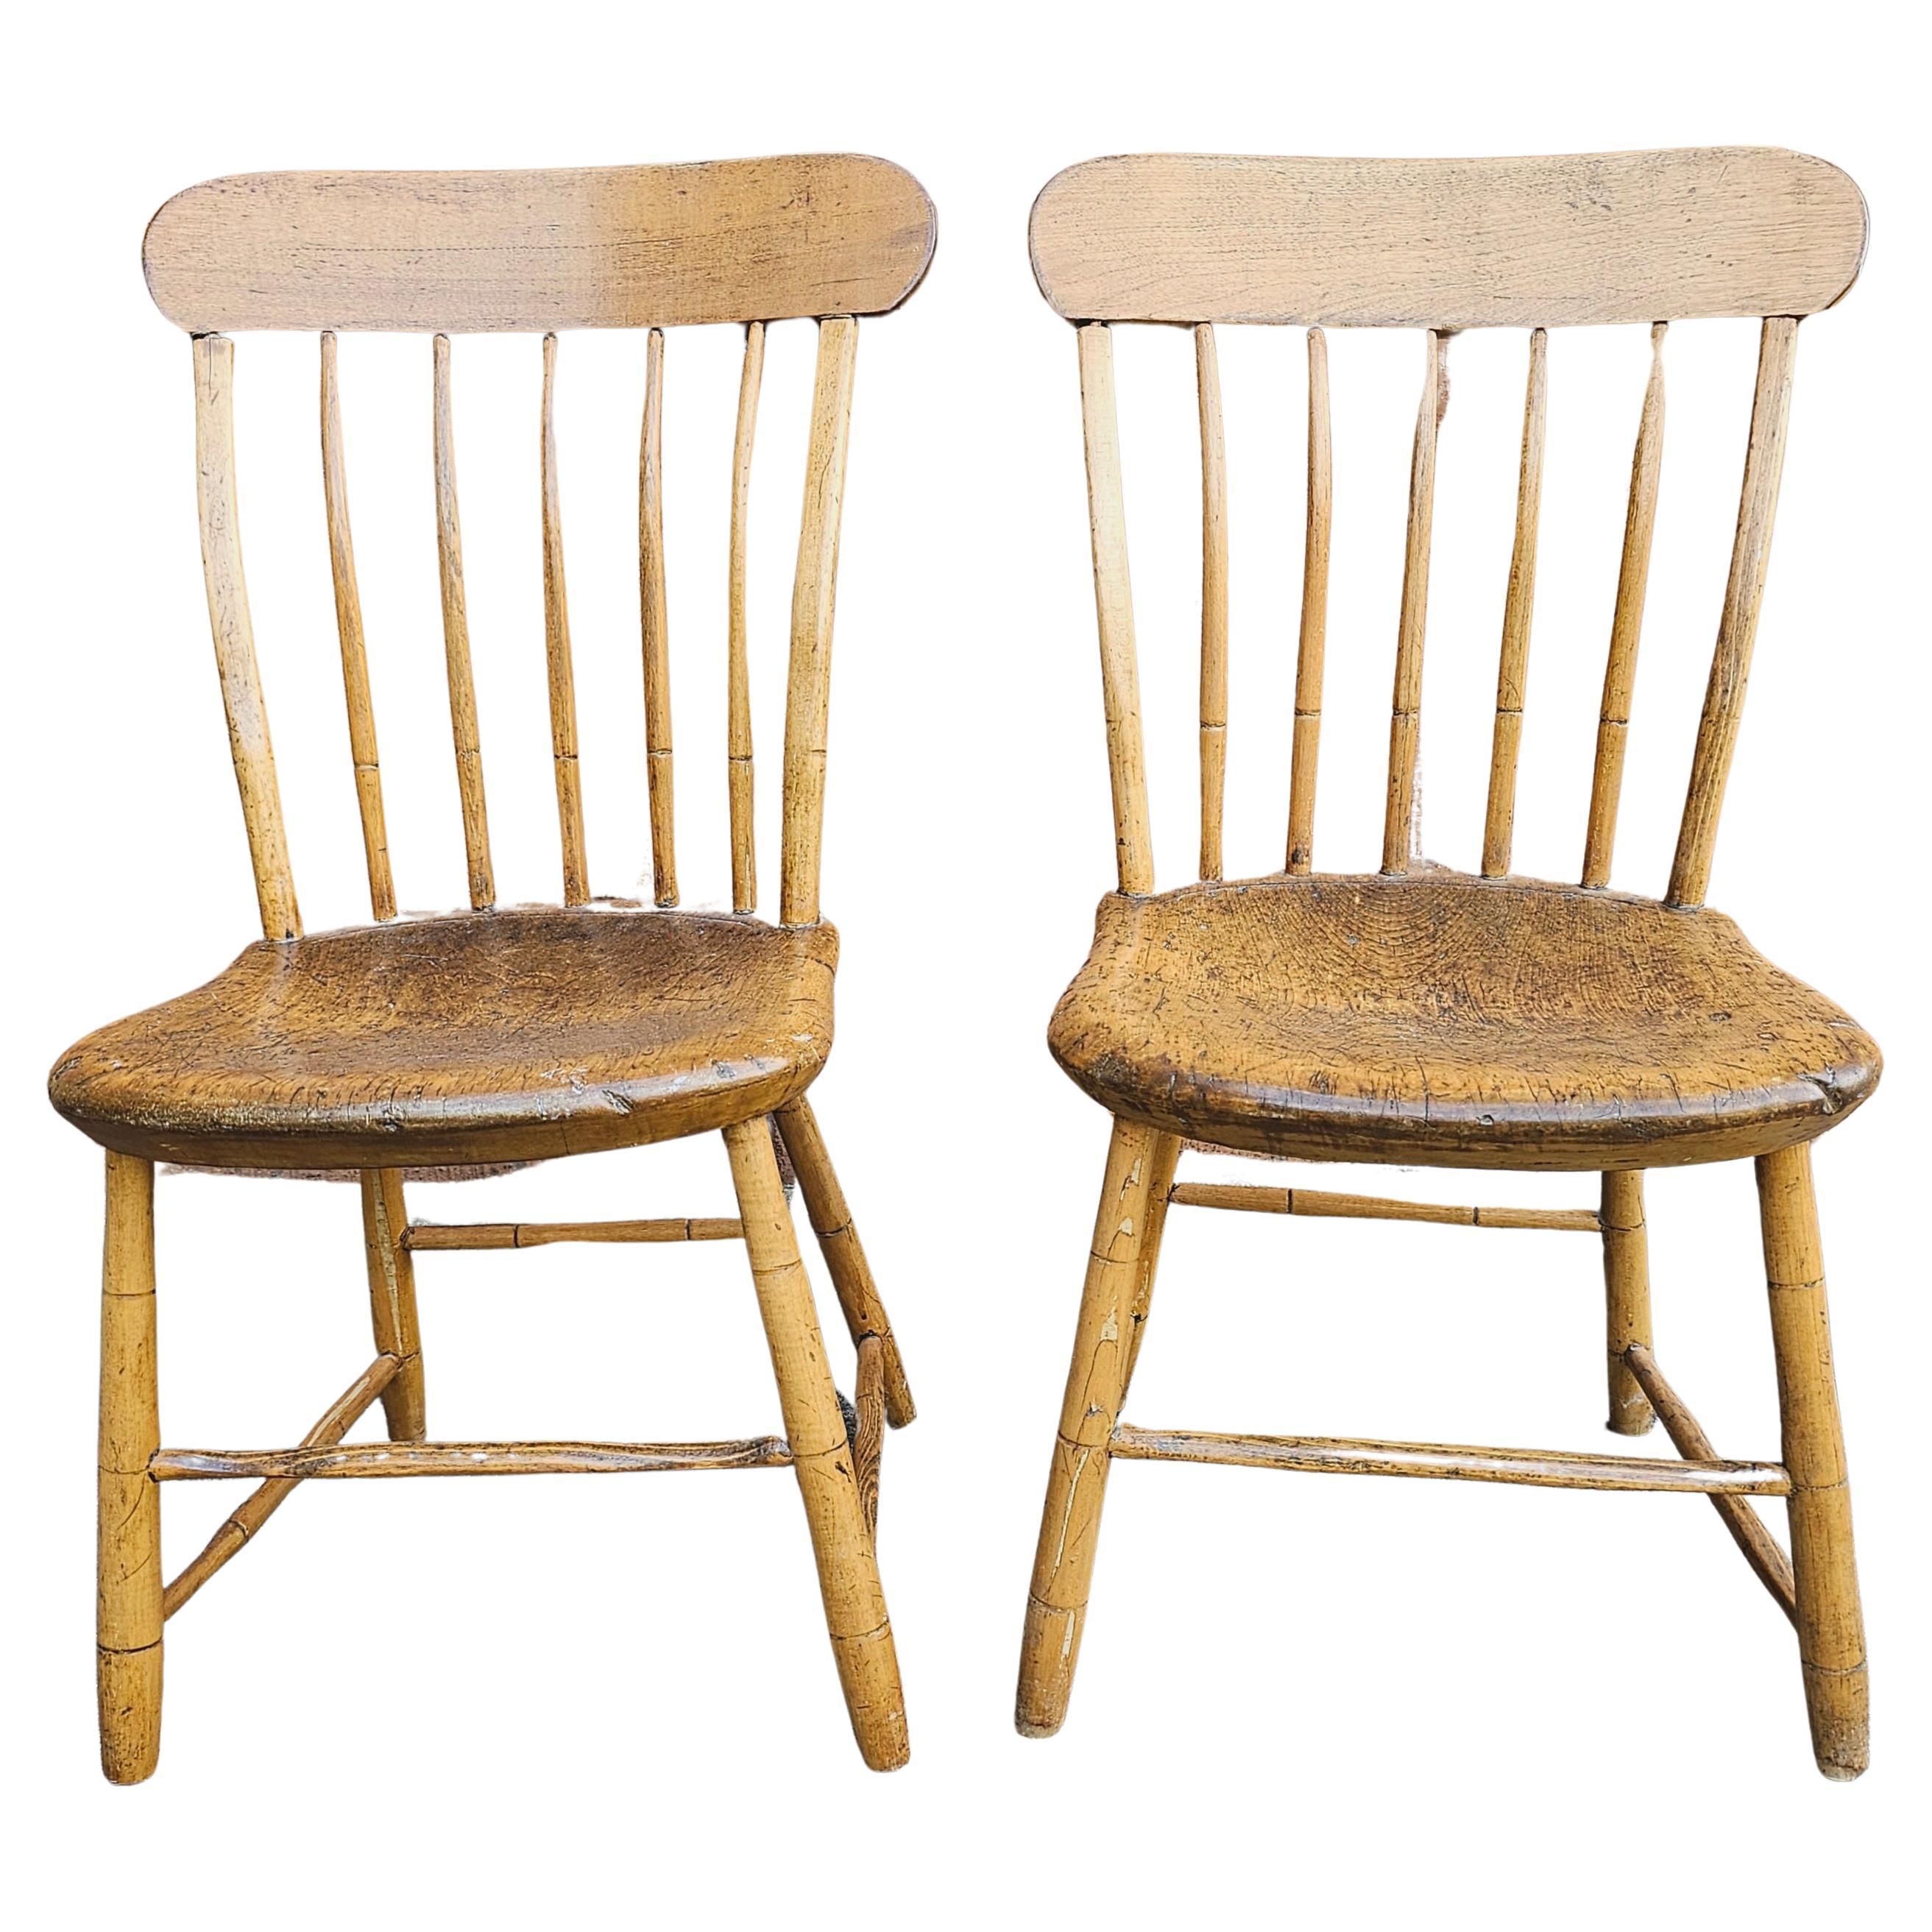 Pair of Early American Patinated Maple Plank Chairs, Circa Mid 19th Century For Sale